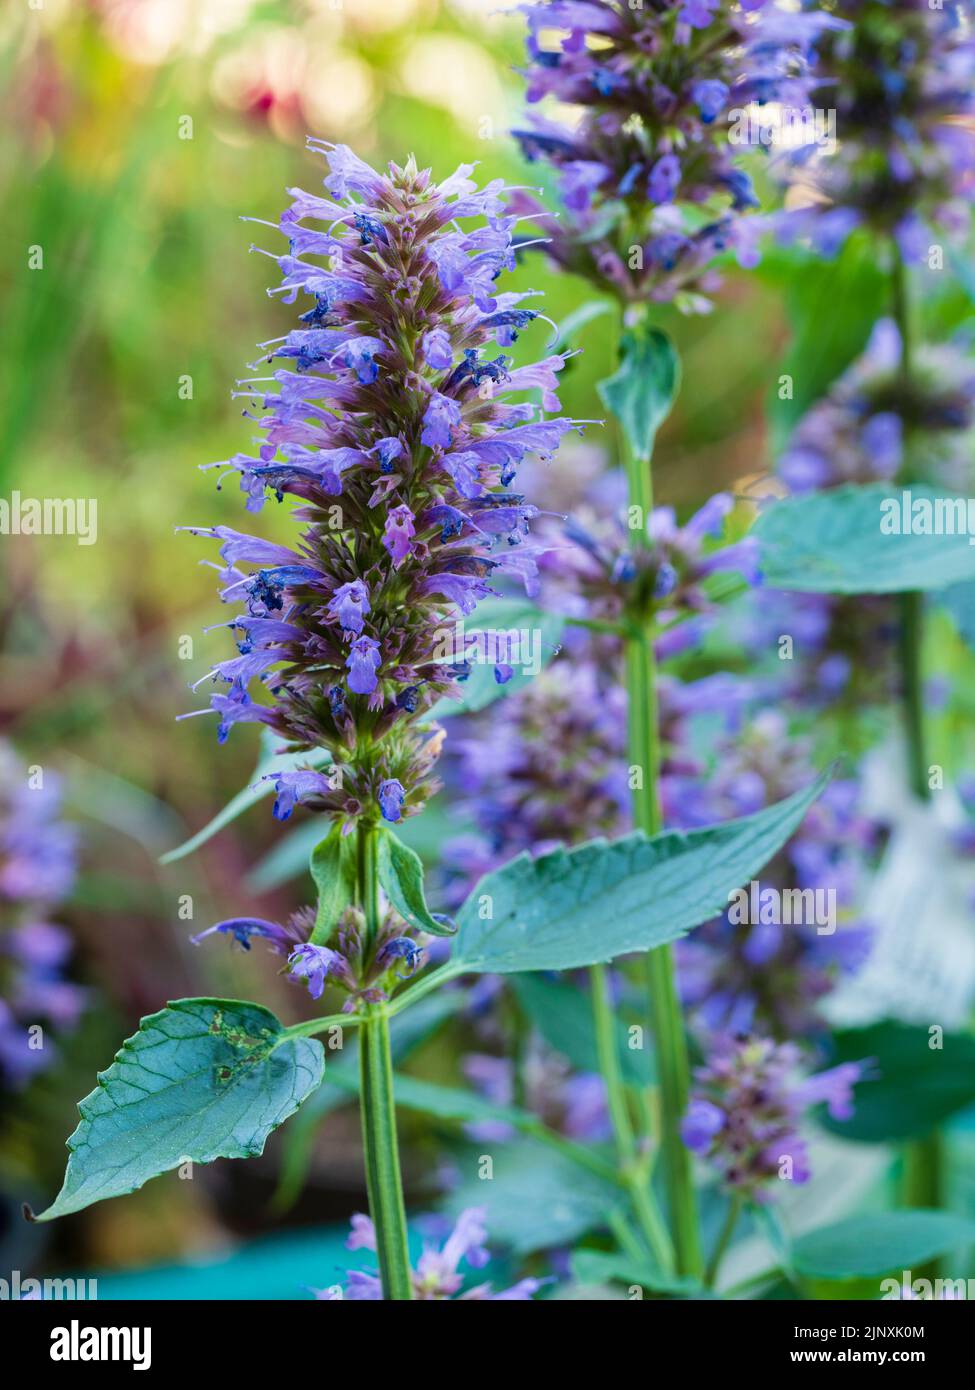 Upright spikes with long lasting masses of blue blooms of the half-hardy drought tolerant perennial anise hyssop, Agastache 'Blue Boa' Stock Photo